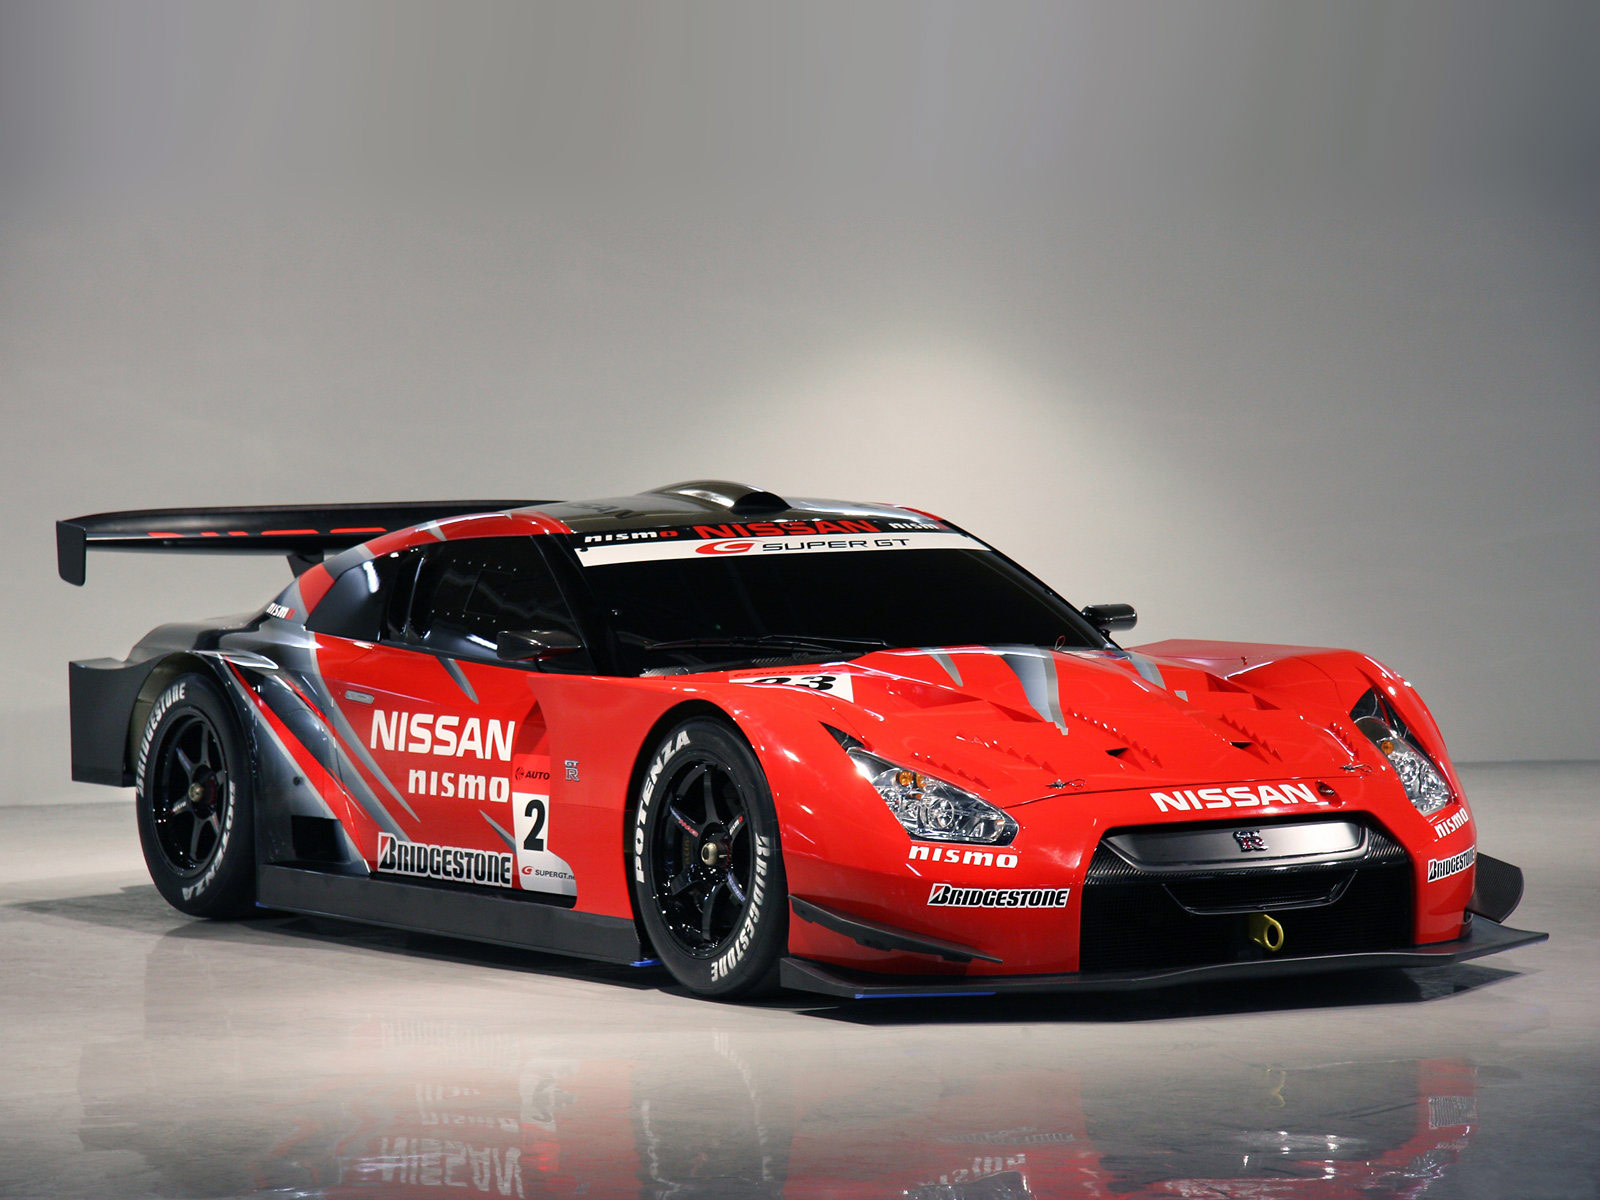 Nissan Gtr Gt500 The Cool Racing Cars Specification Wallpaper Engine